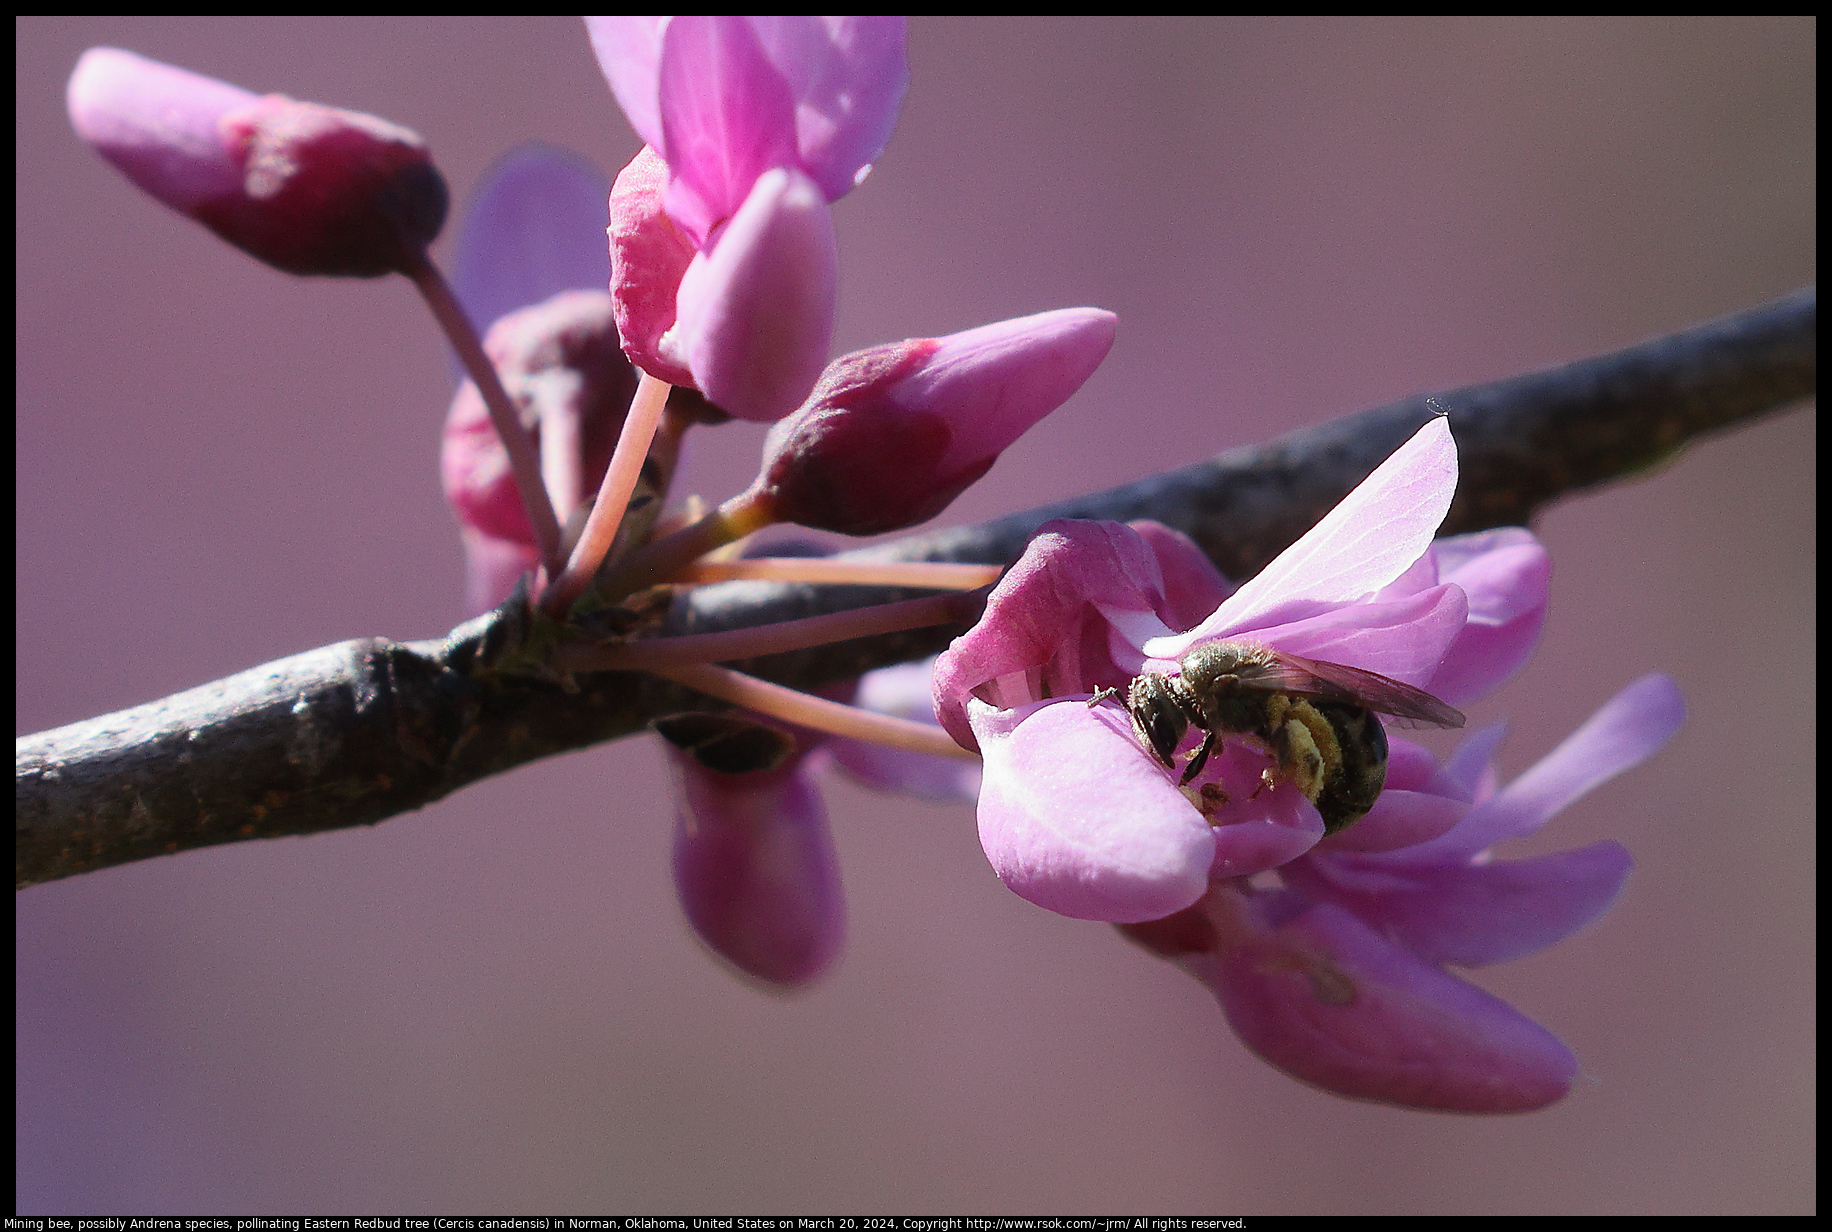 Mining bee, possibly Andrena species, pollinating Eastern Redbud tree (Cercis canadensis) in Norman, Oklahoma, United States on March 20, 2024